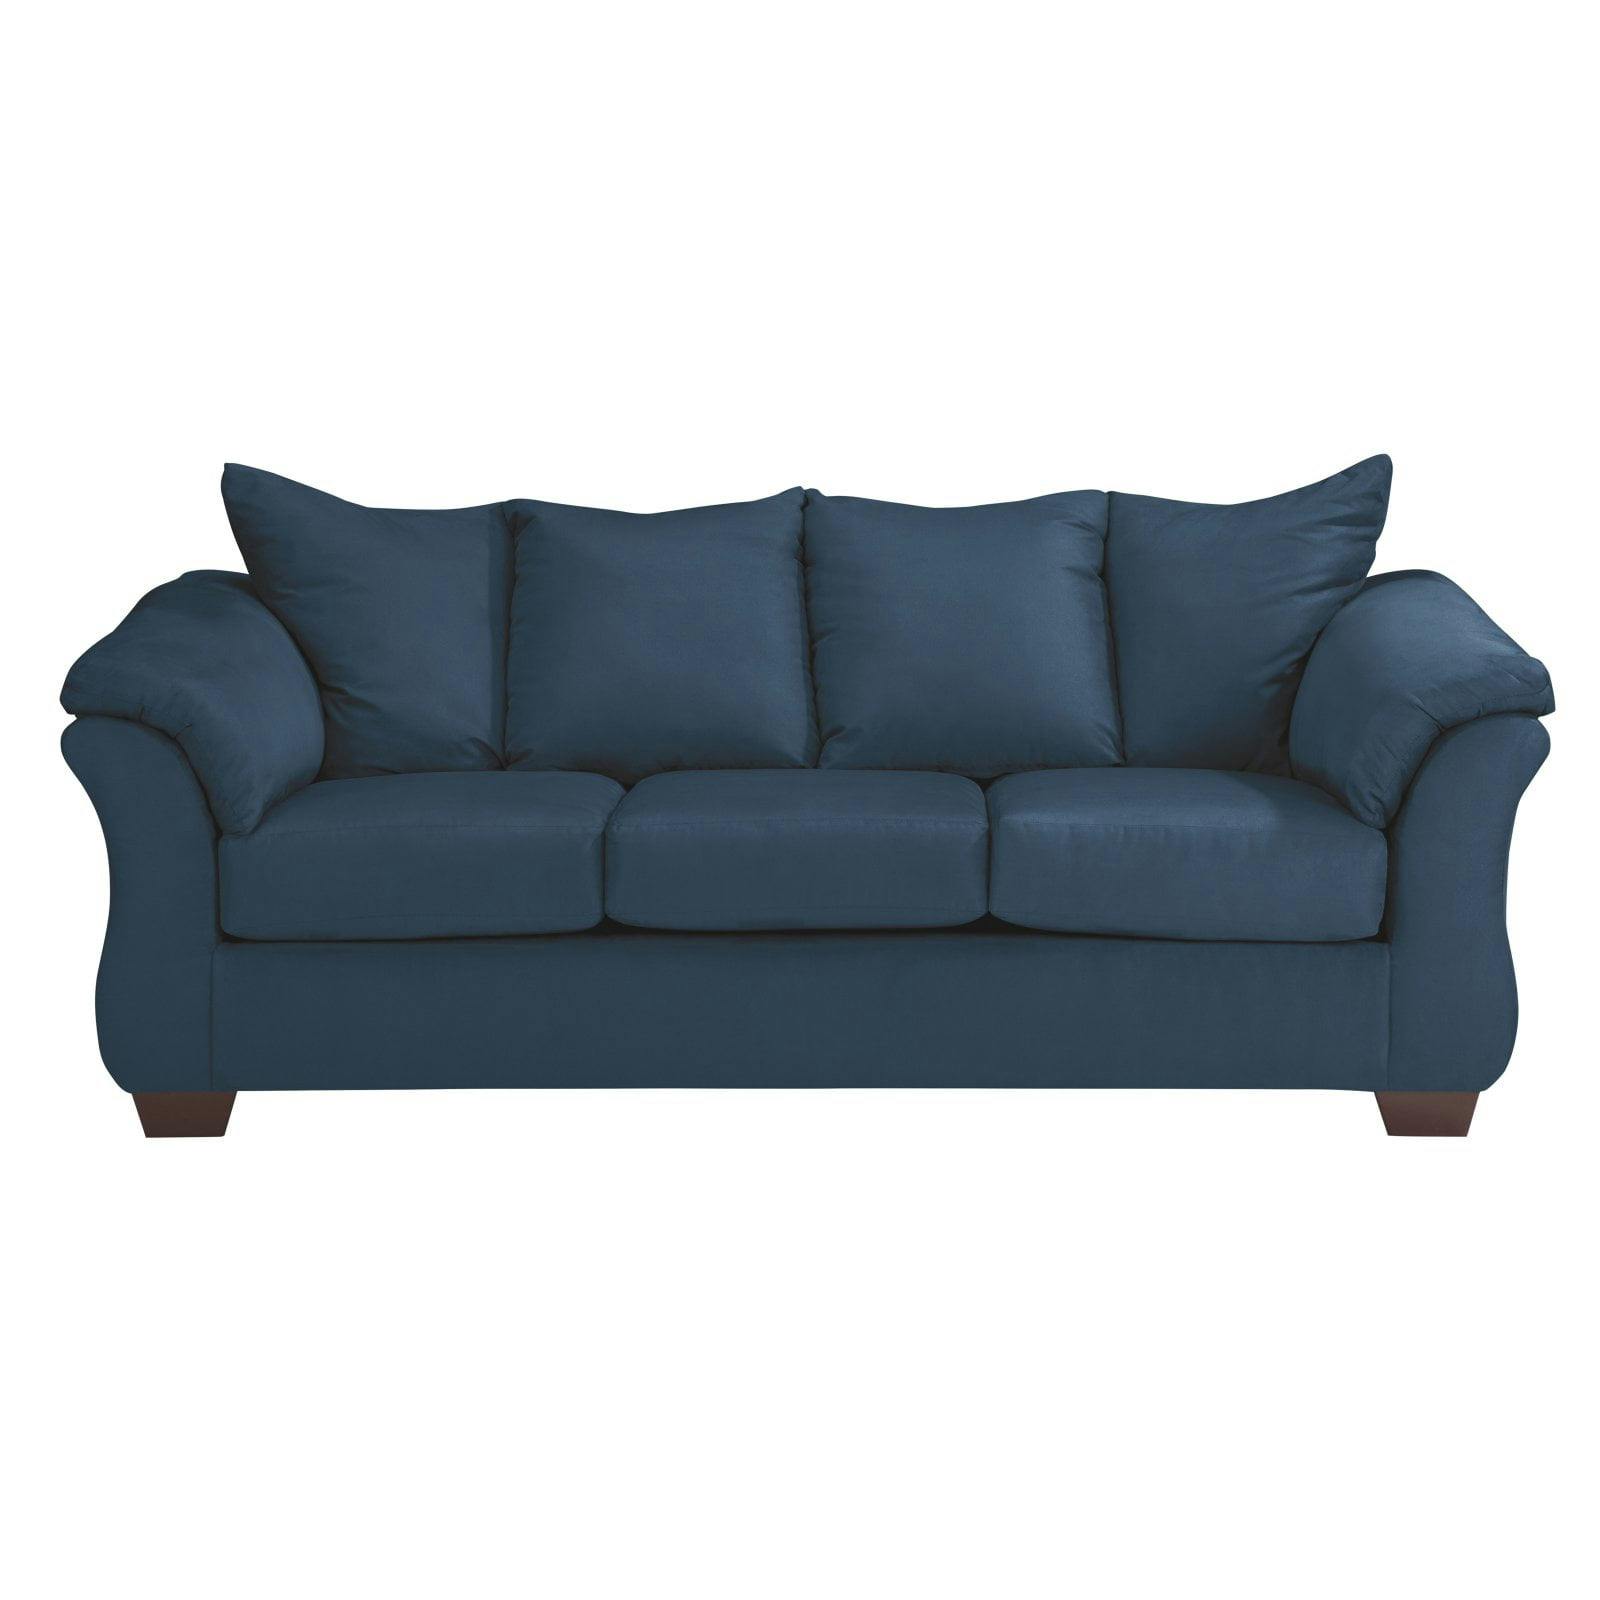 Darcy Blue Contemporary Sleeper Sofa with Pillow-top Arms